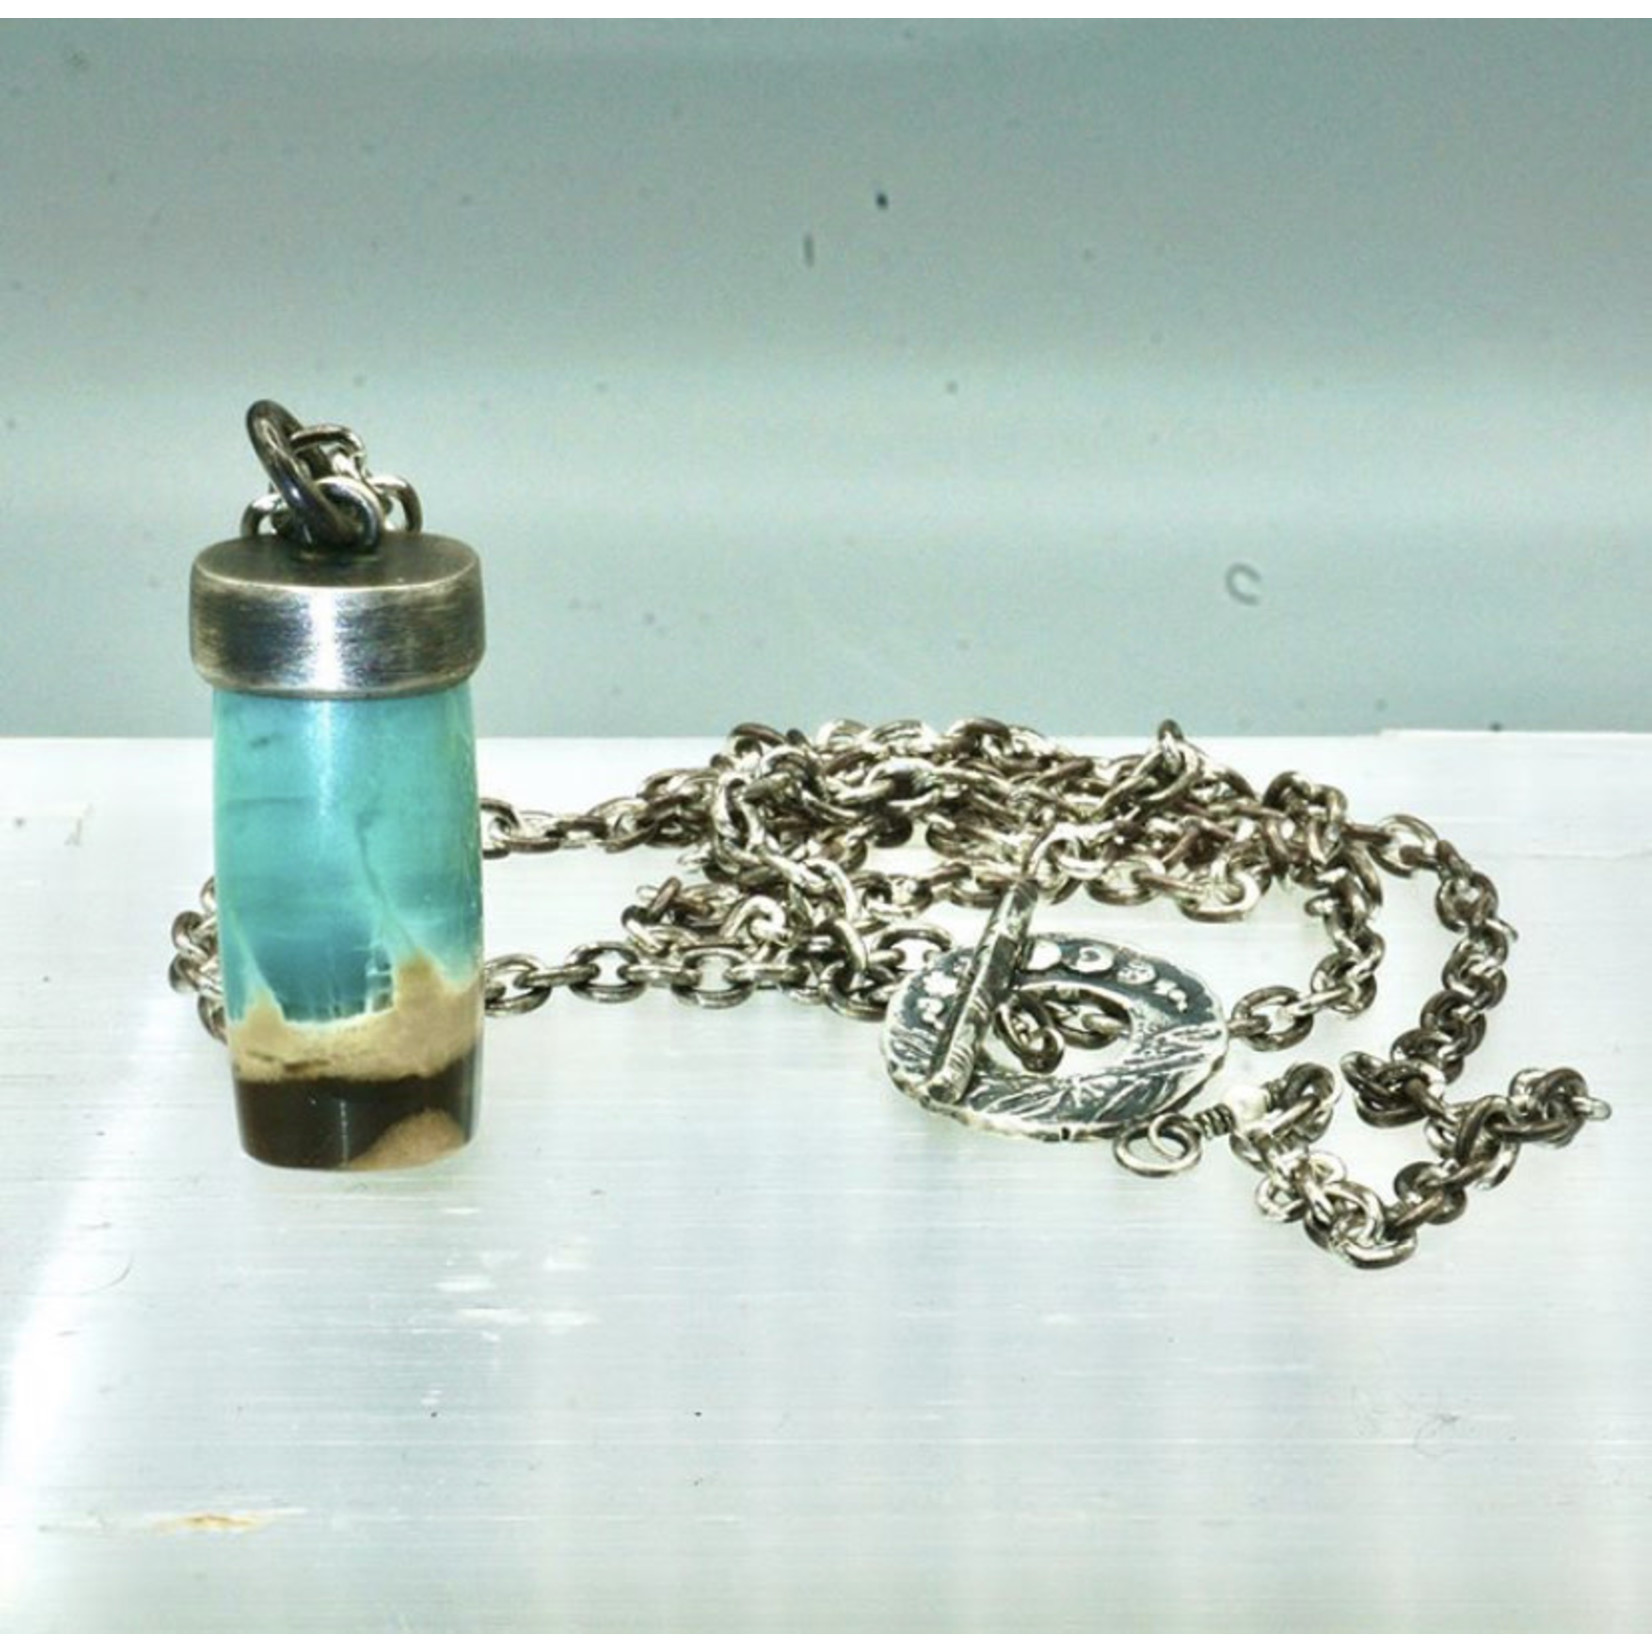 Opalized Wood Amulet w/long Oxidized silver chain necklace and ornate clasp